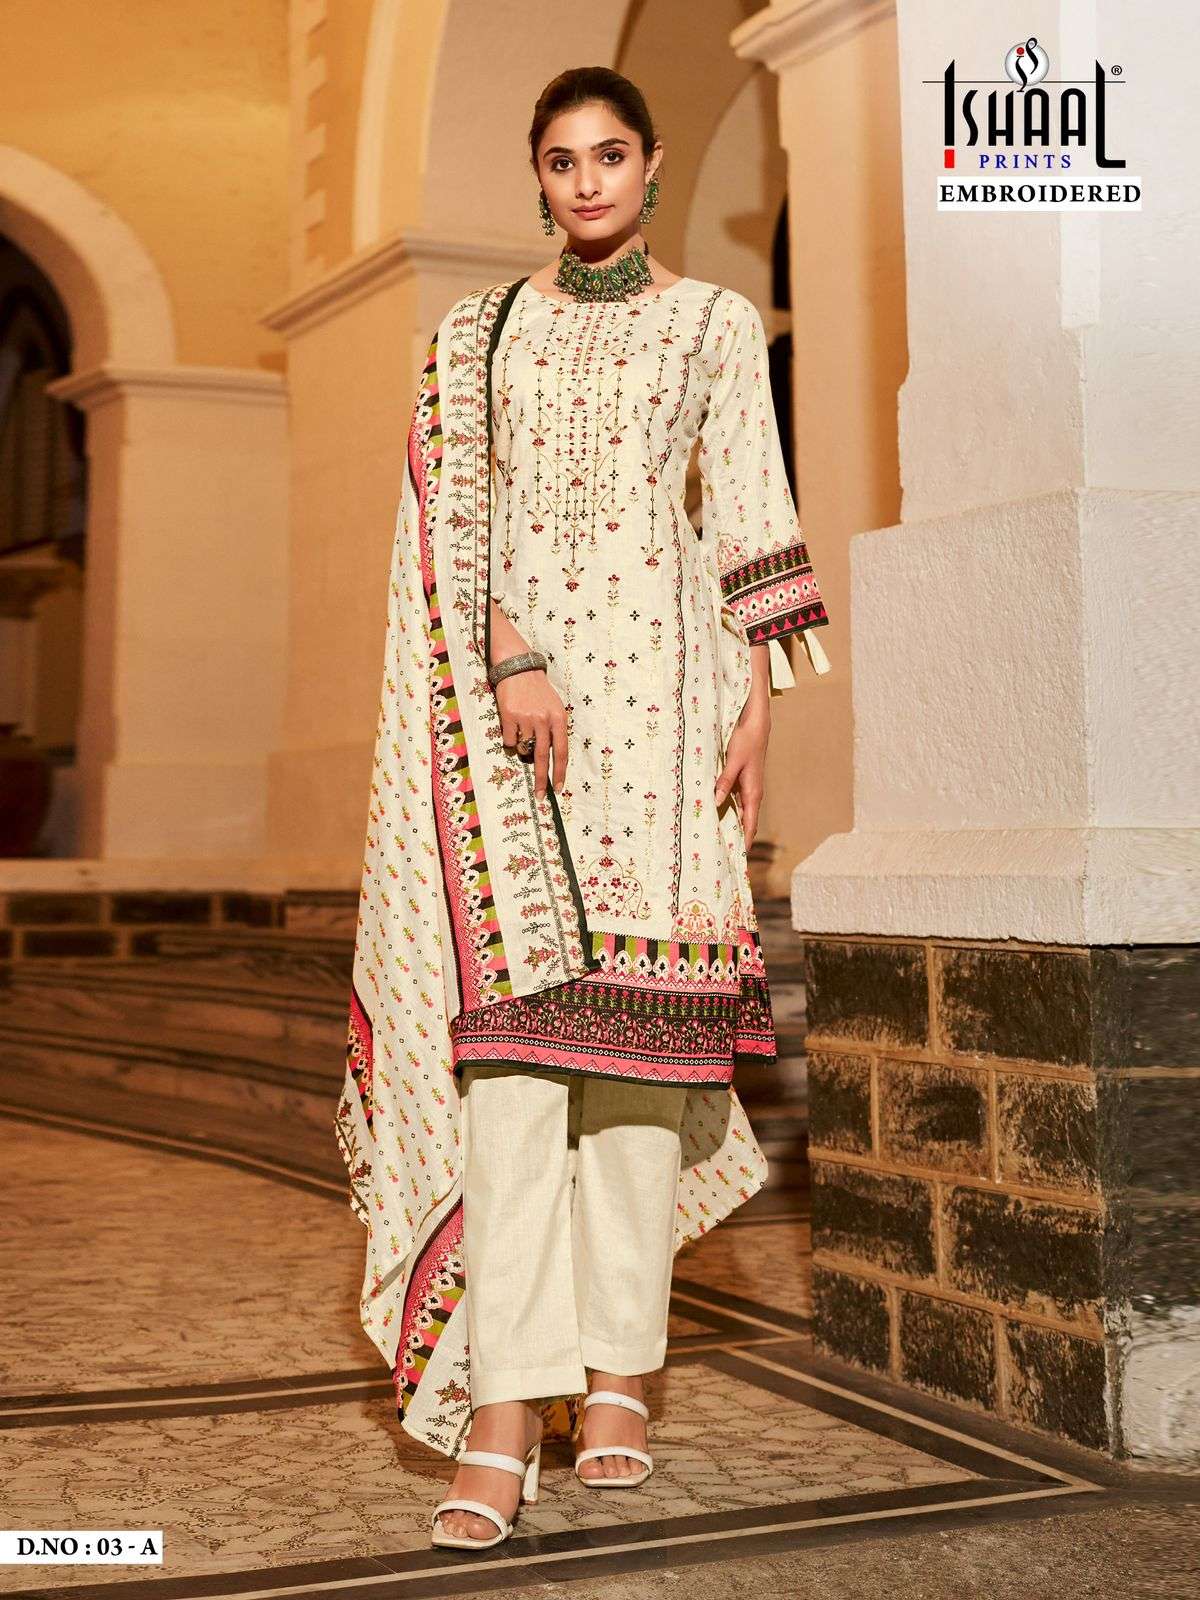 ISHAAL PRINTS EMBROIDERED D NO 03 